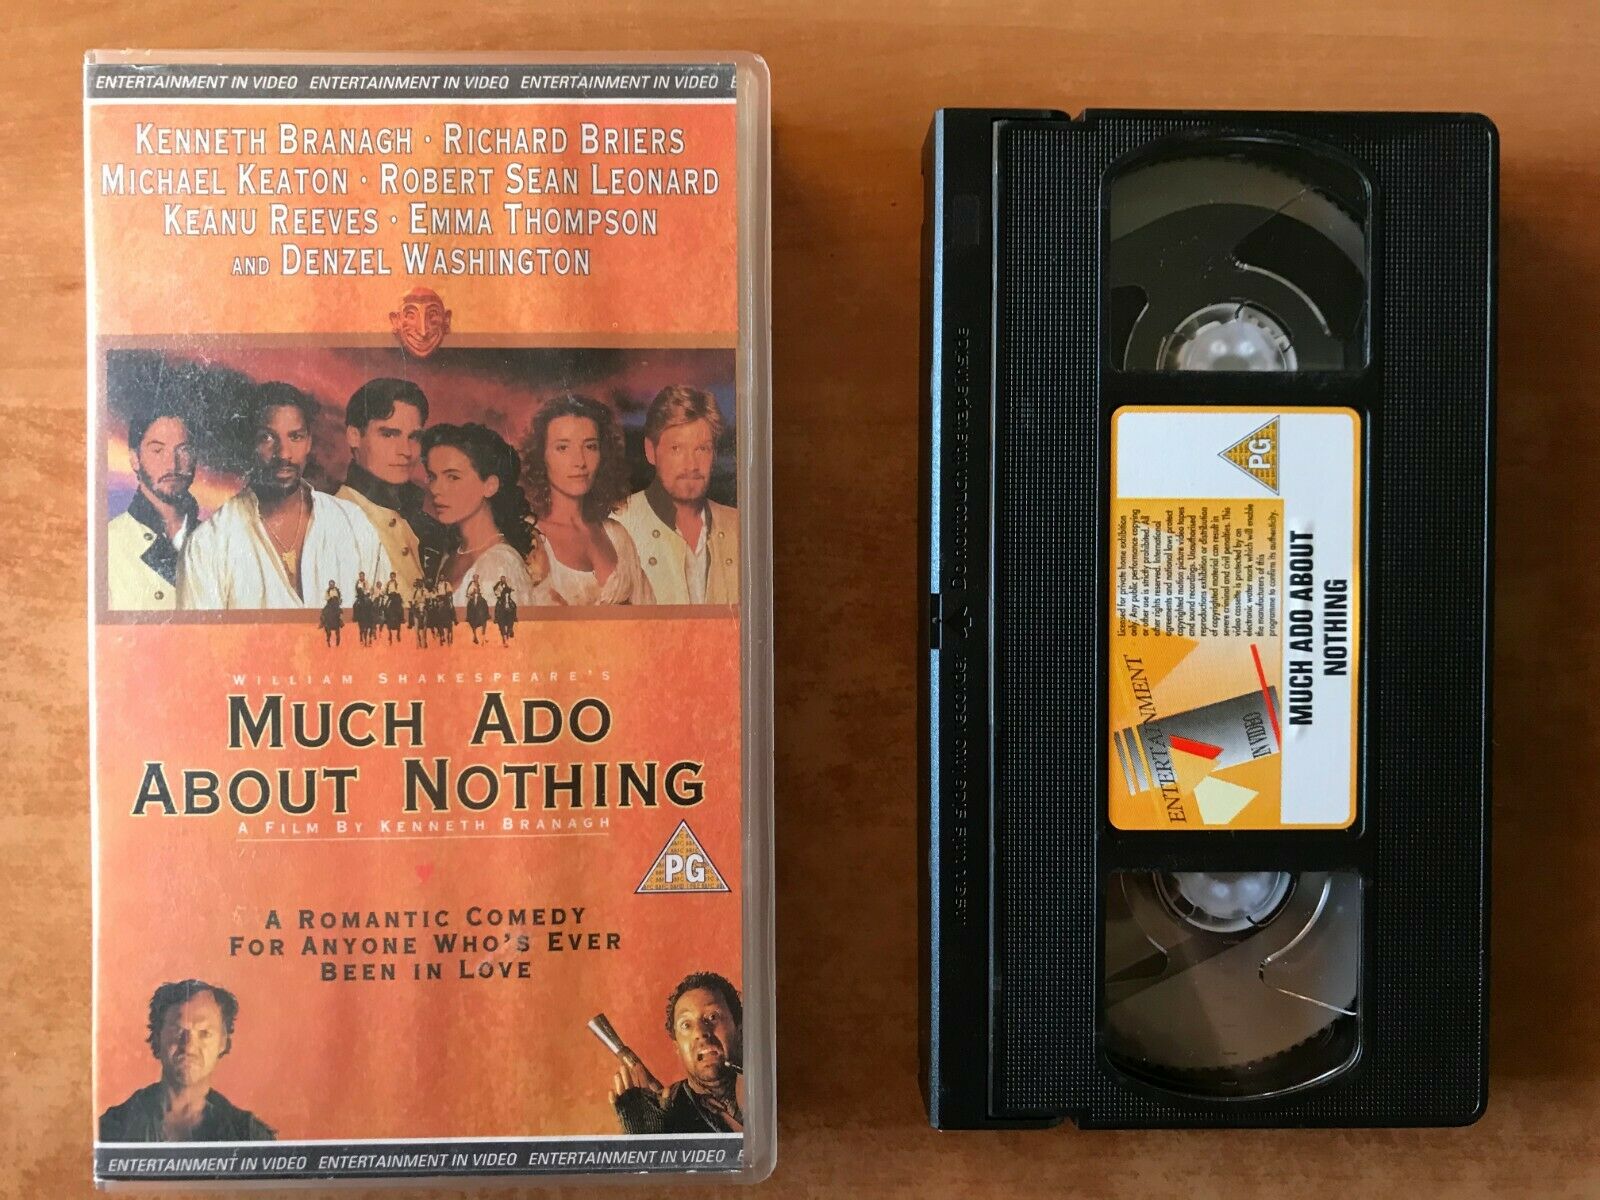 Much Ado About Nothing (1993); [William Shakespeare] Romantic Drama - Pal VHS-